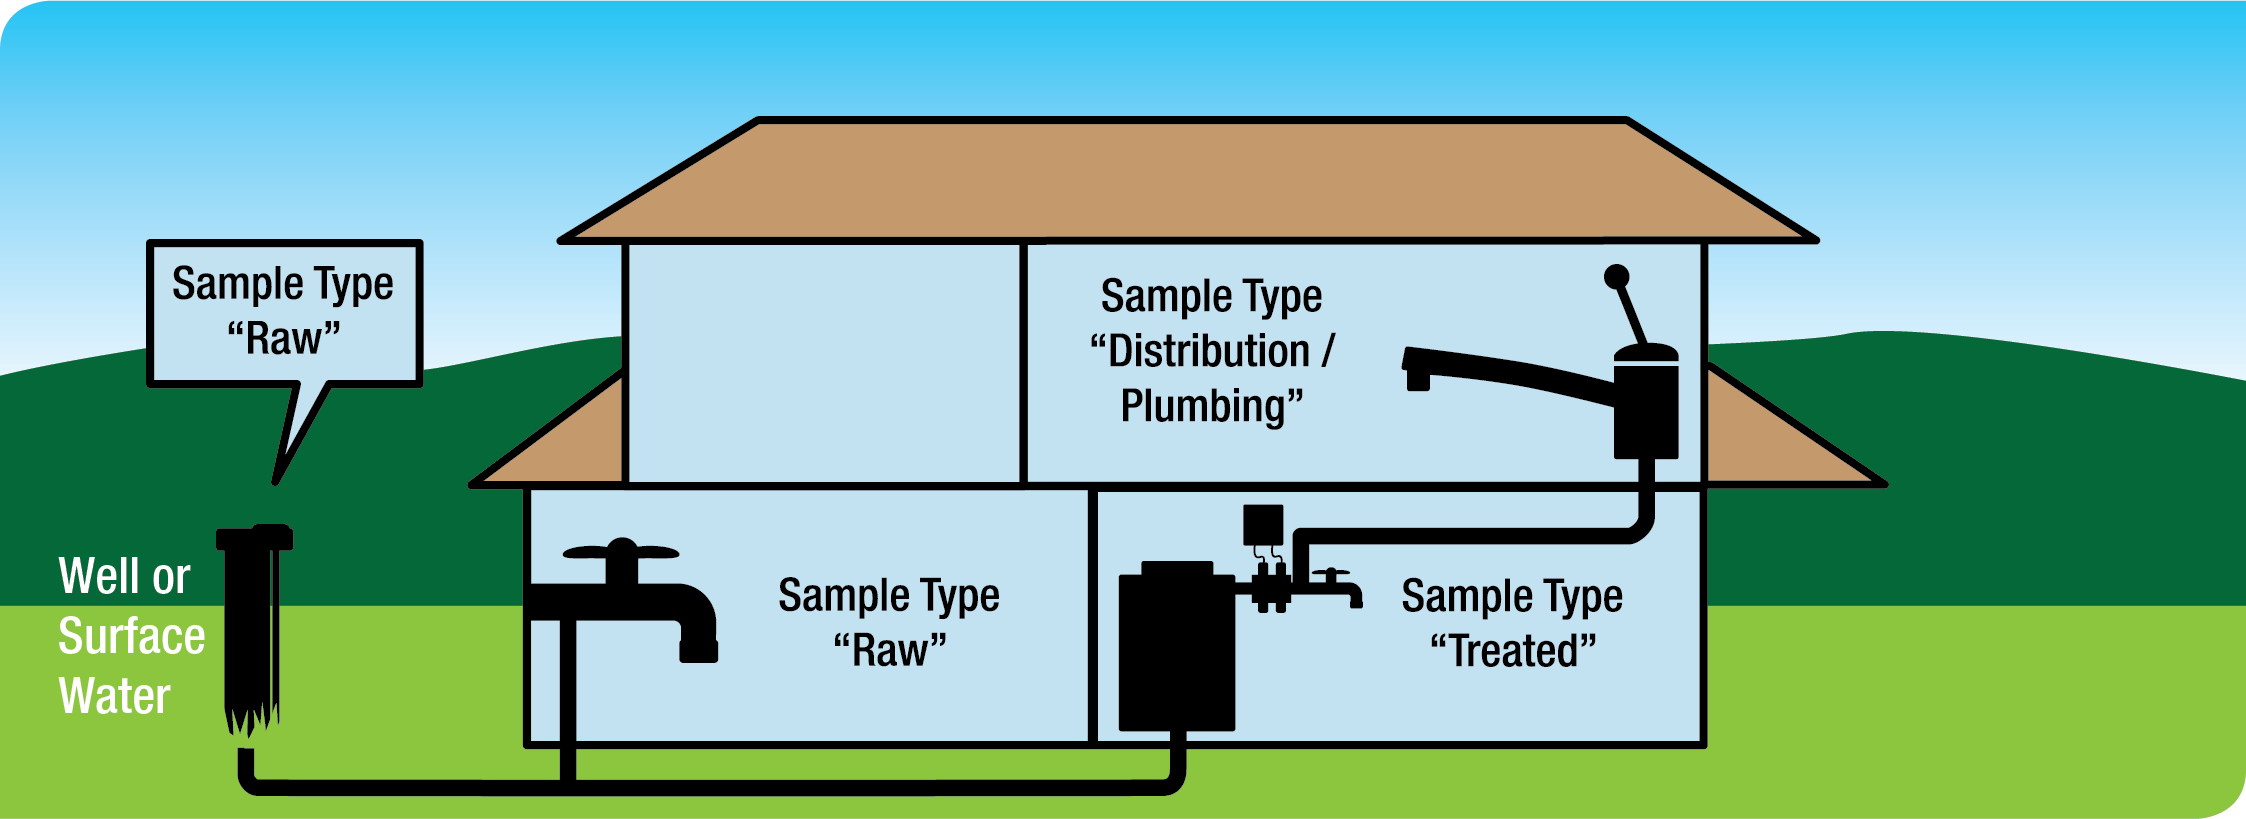 This is a picture which illustrates the sampling locations for a non-municipal year-round residential system with a single building. Within the picture of a single building water is drawn from a well with treatment located in the basement. The well is labelled as sample type raw. The tap directly after treatment in the basement is labelled as sample type treated. The tap on the second floor of the building is labelled as sample type distribution and plumbing.